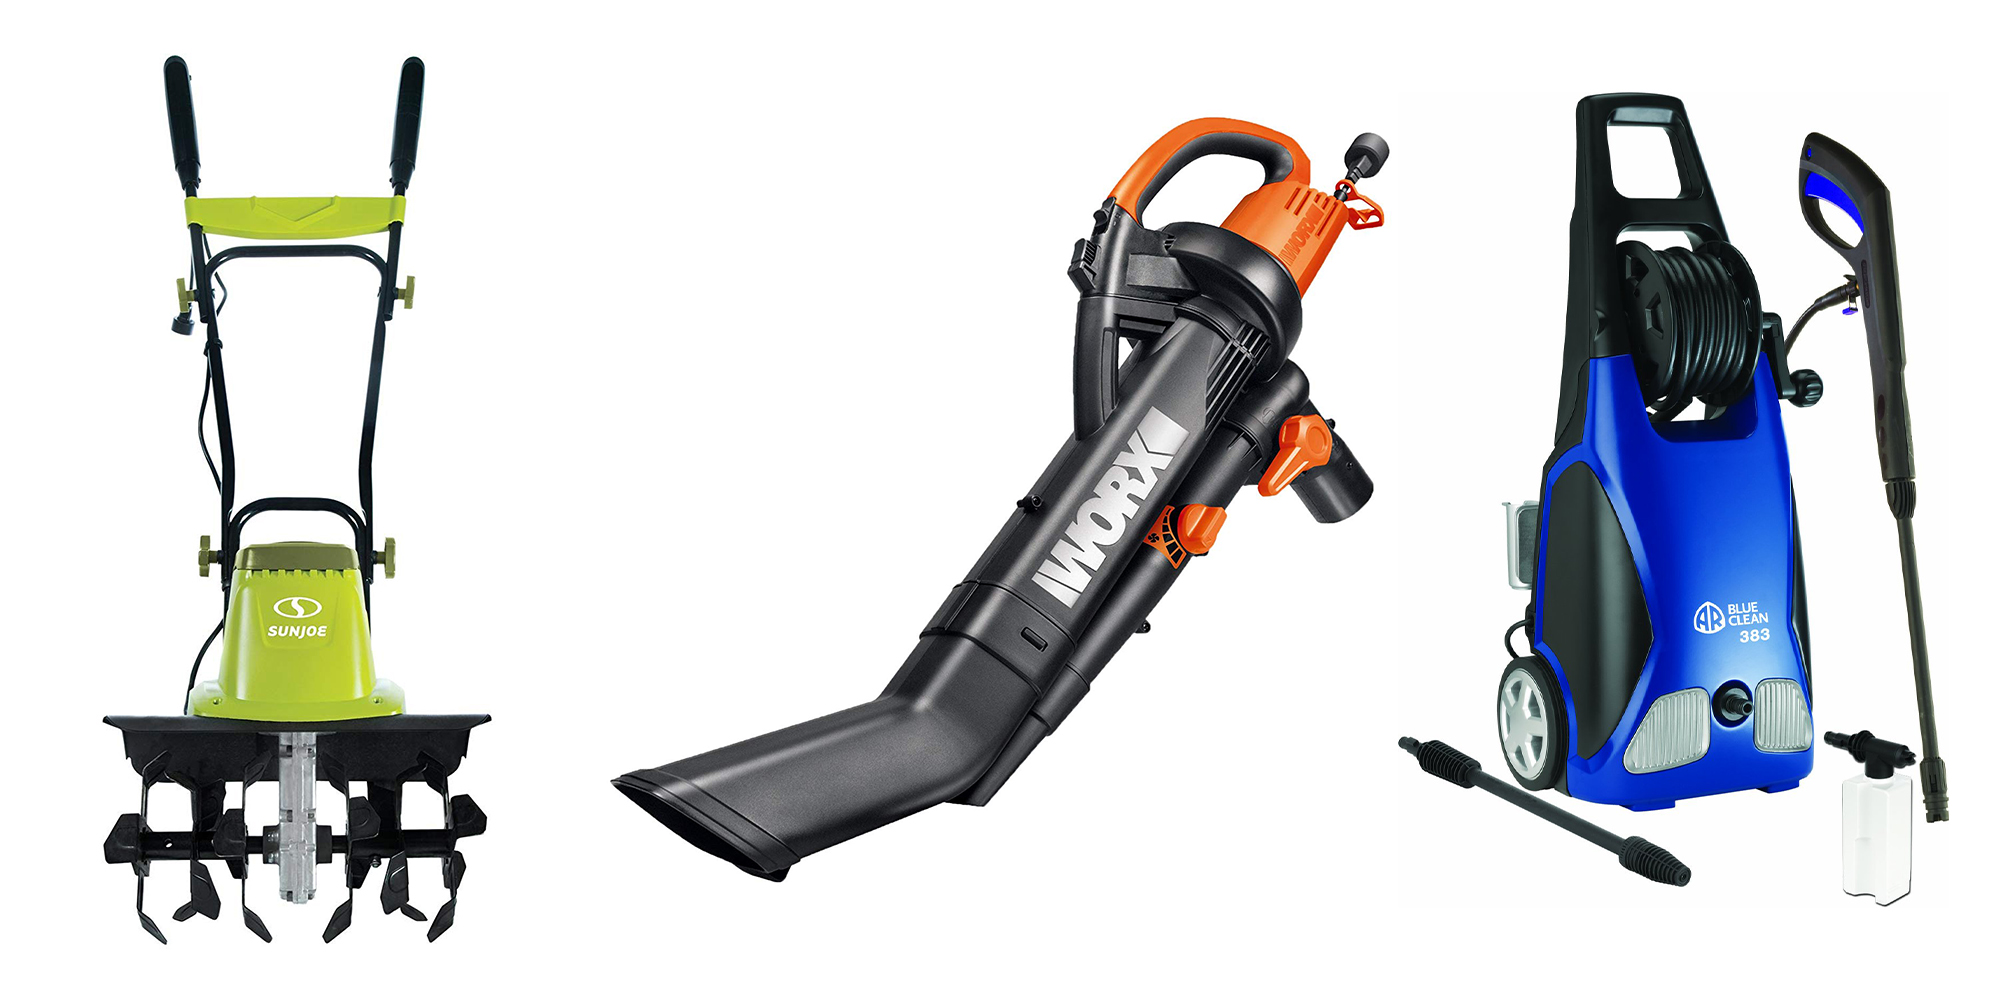 Save on electric outdoor tools in today’s Green Deals: Sun Joe tillers, WORX blowers, more